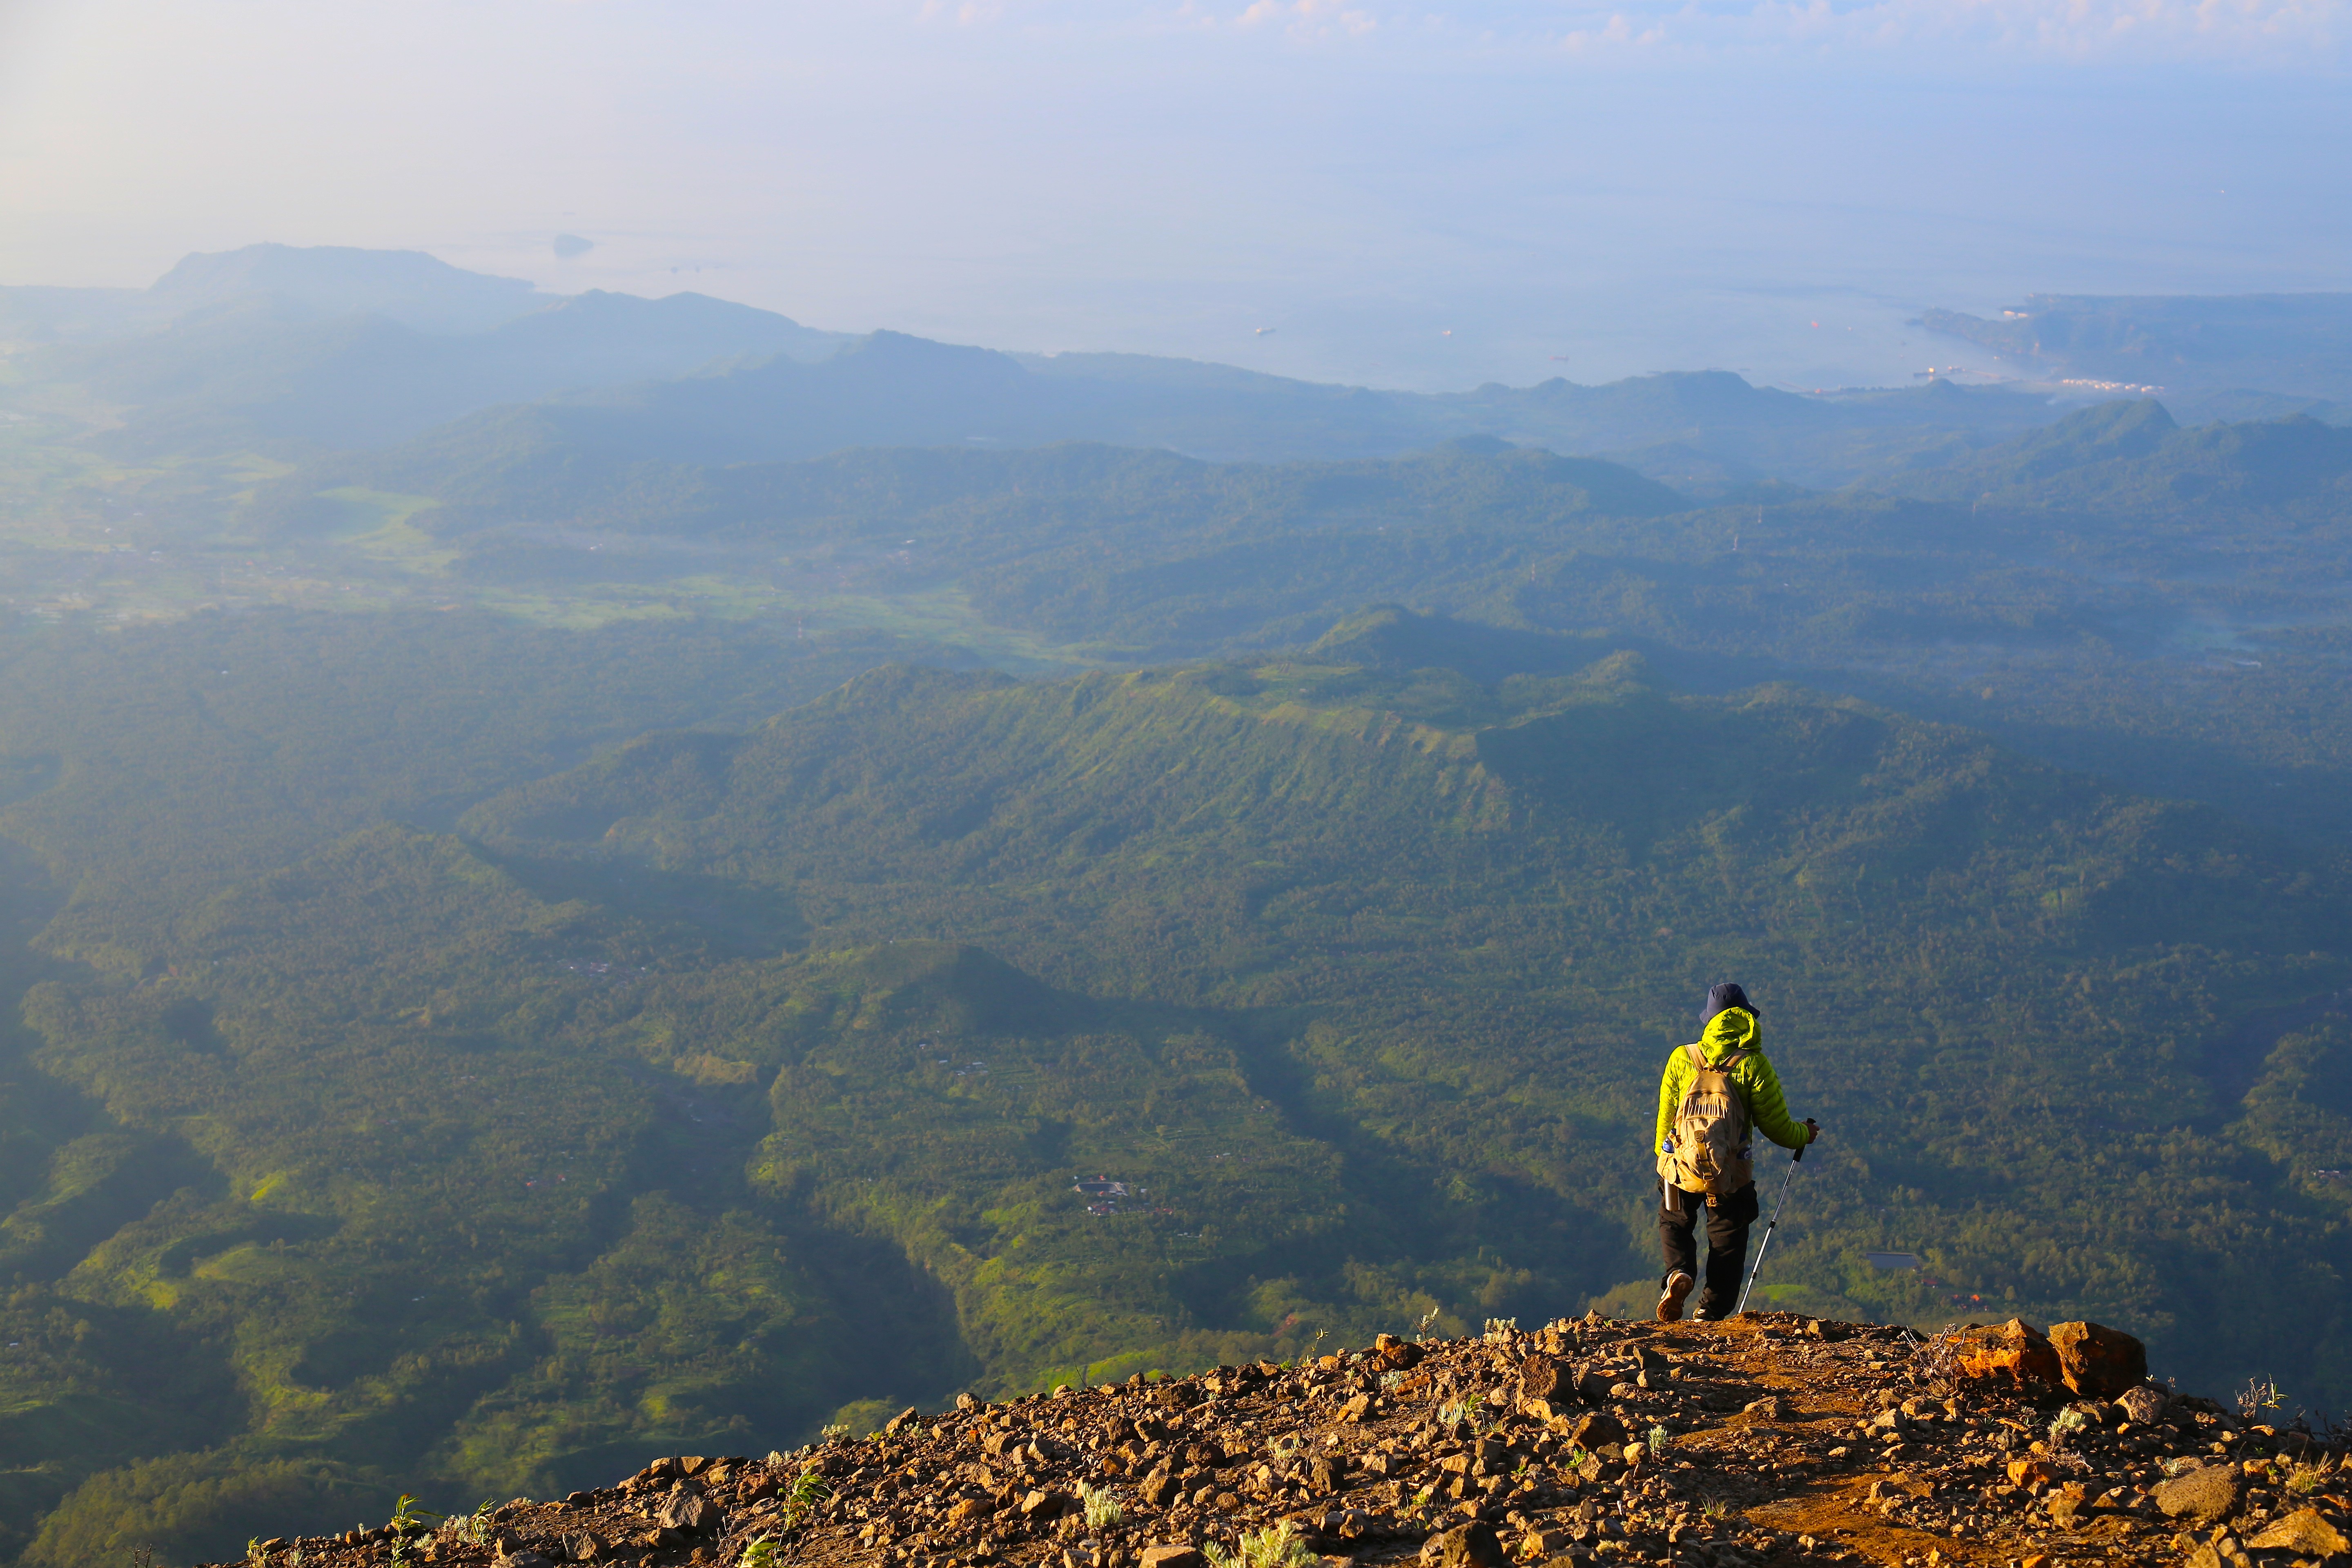 Hiking guide Wayan Ariana contemplates the views of Bali’s coastline on the descent of Mount Agung. Photo: Graeme Green